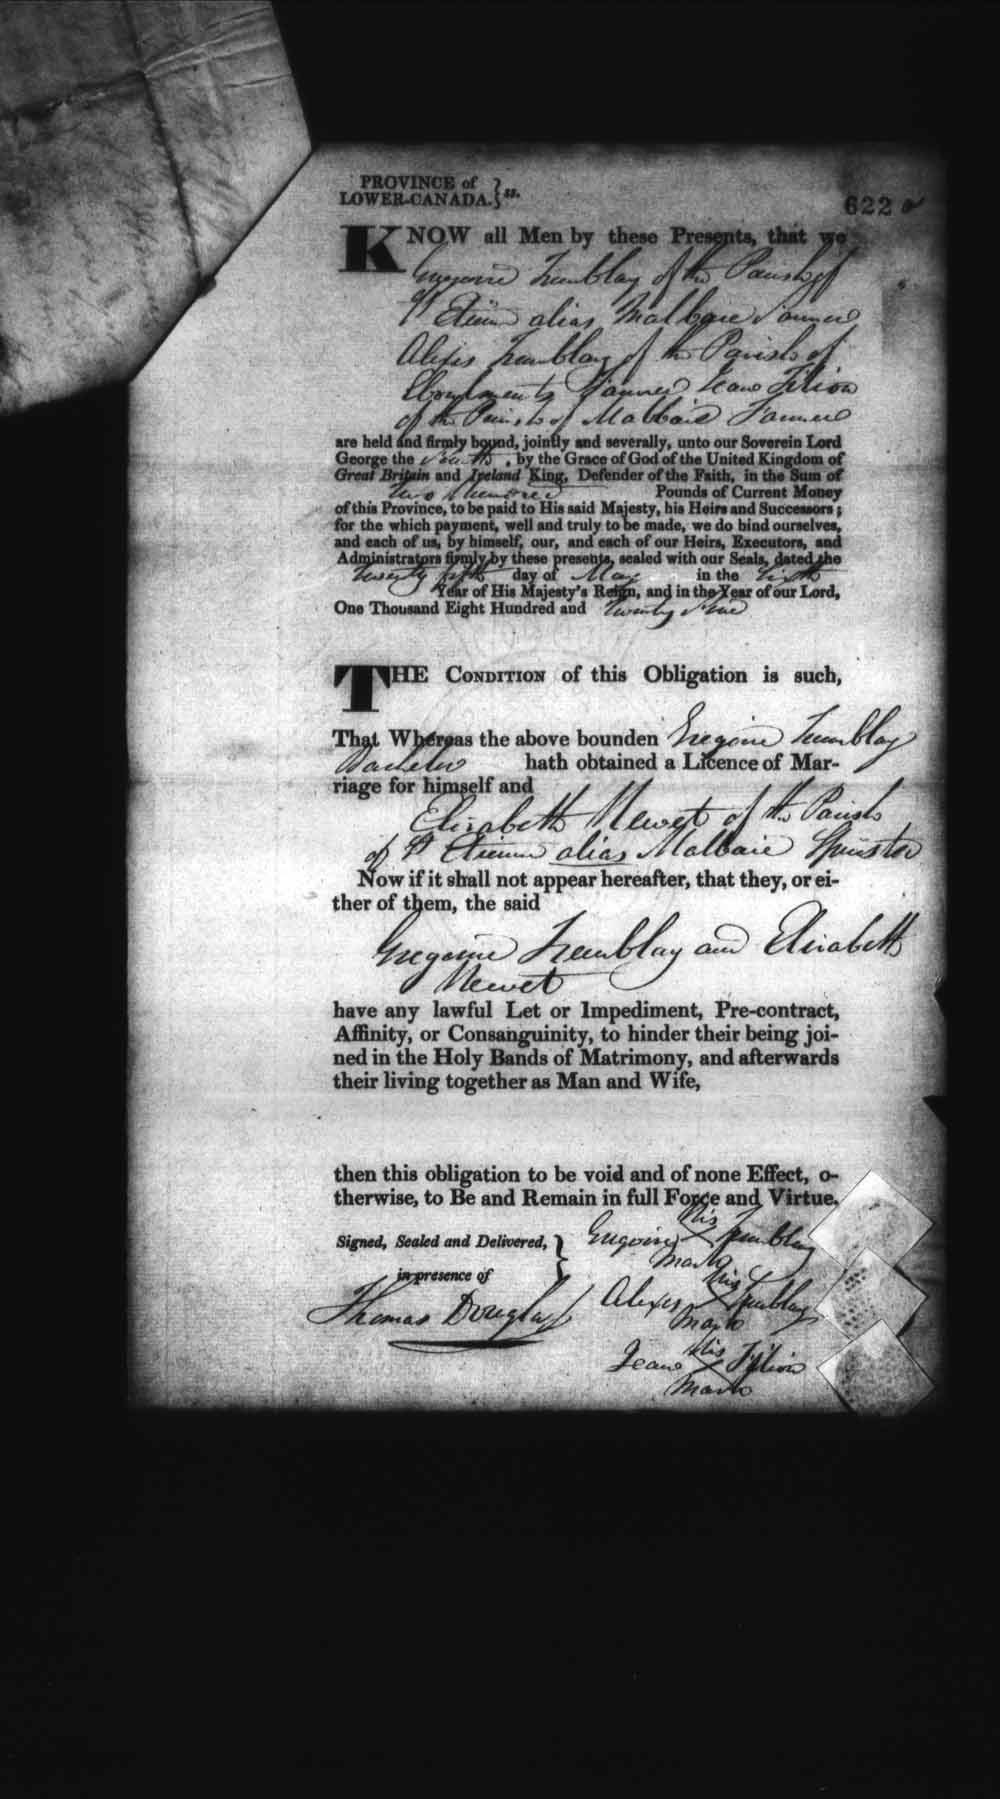 Digitized page of Upper and Lower Canada Marriage Bonds (1779-1865) for Image No.: e008236640